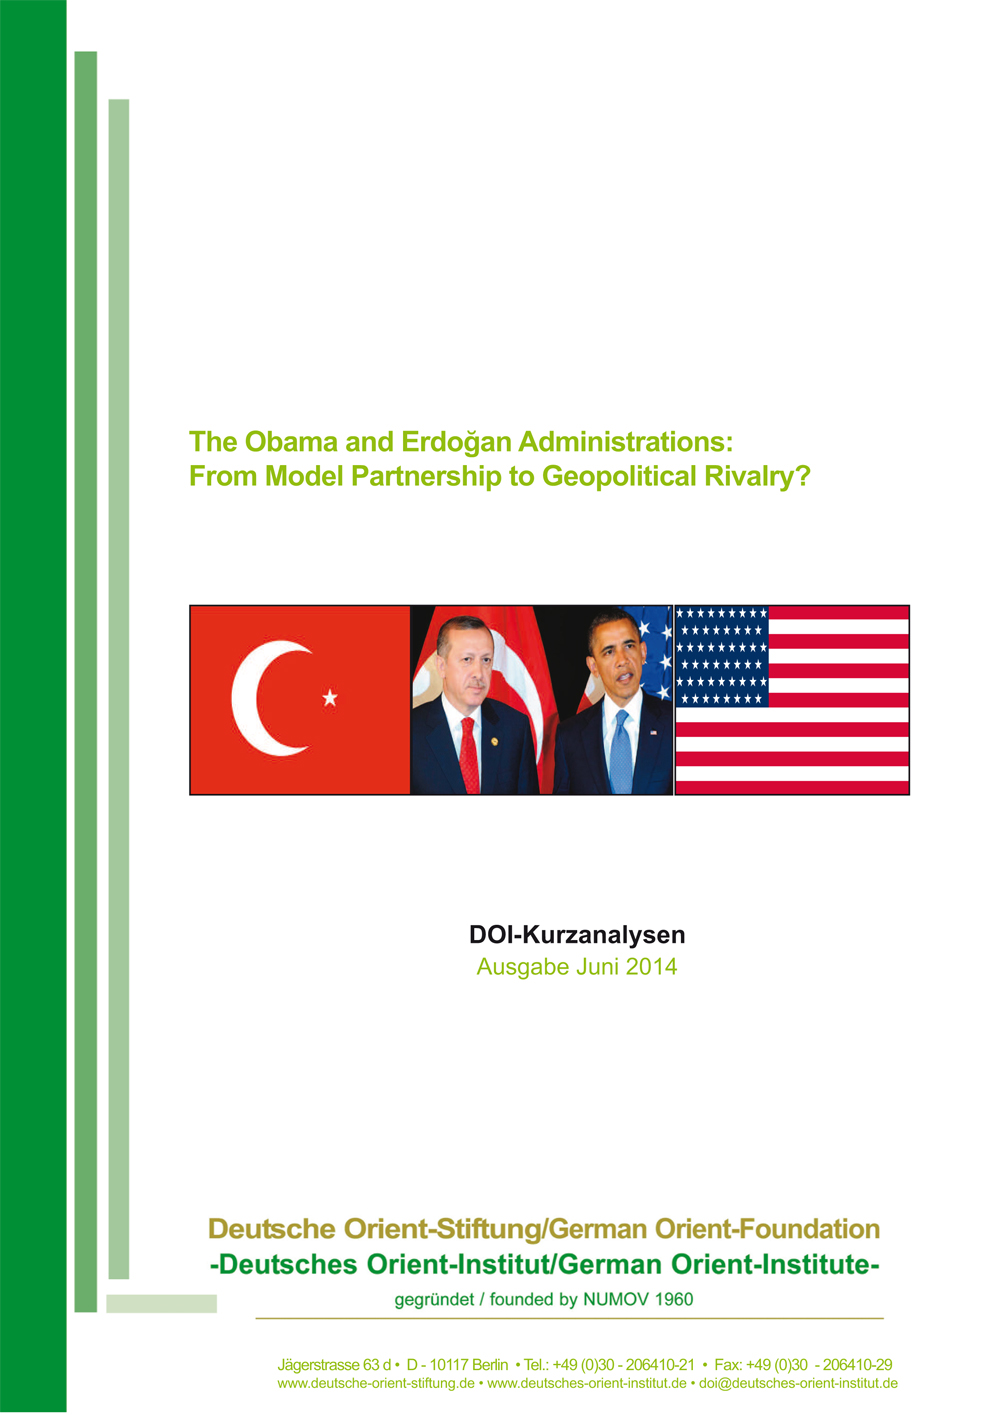 Featured image for “The Obama and Erdogan Administrations: From Model Partnership to Geopolitical Rivalry?”